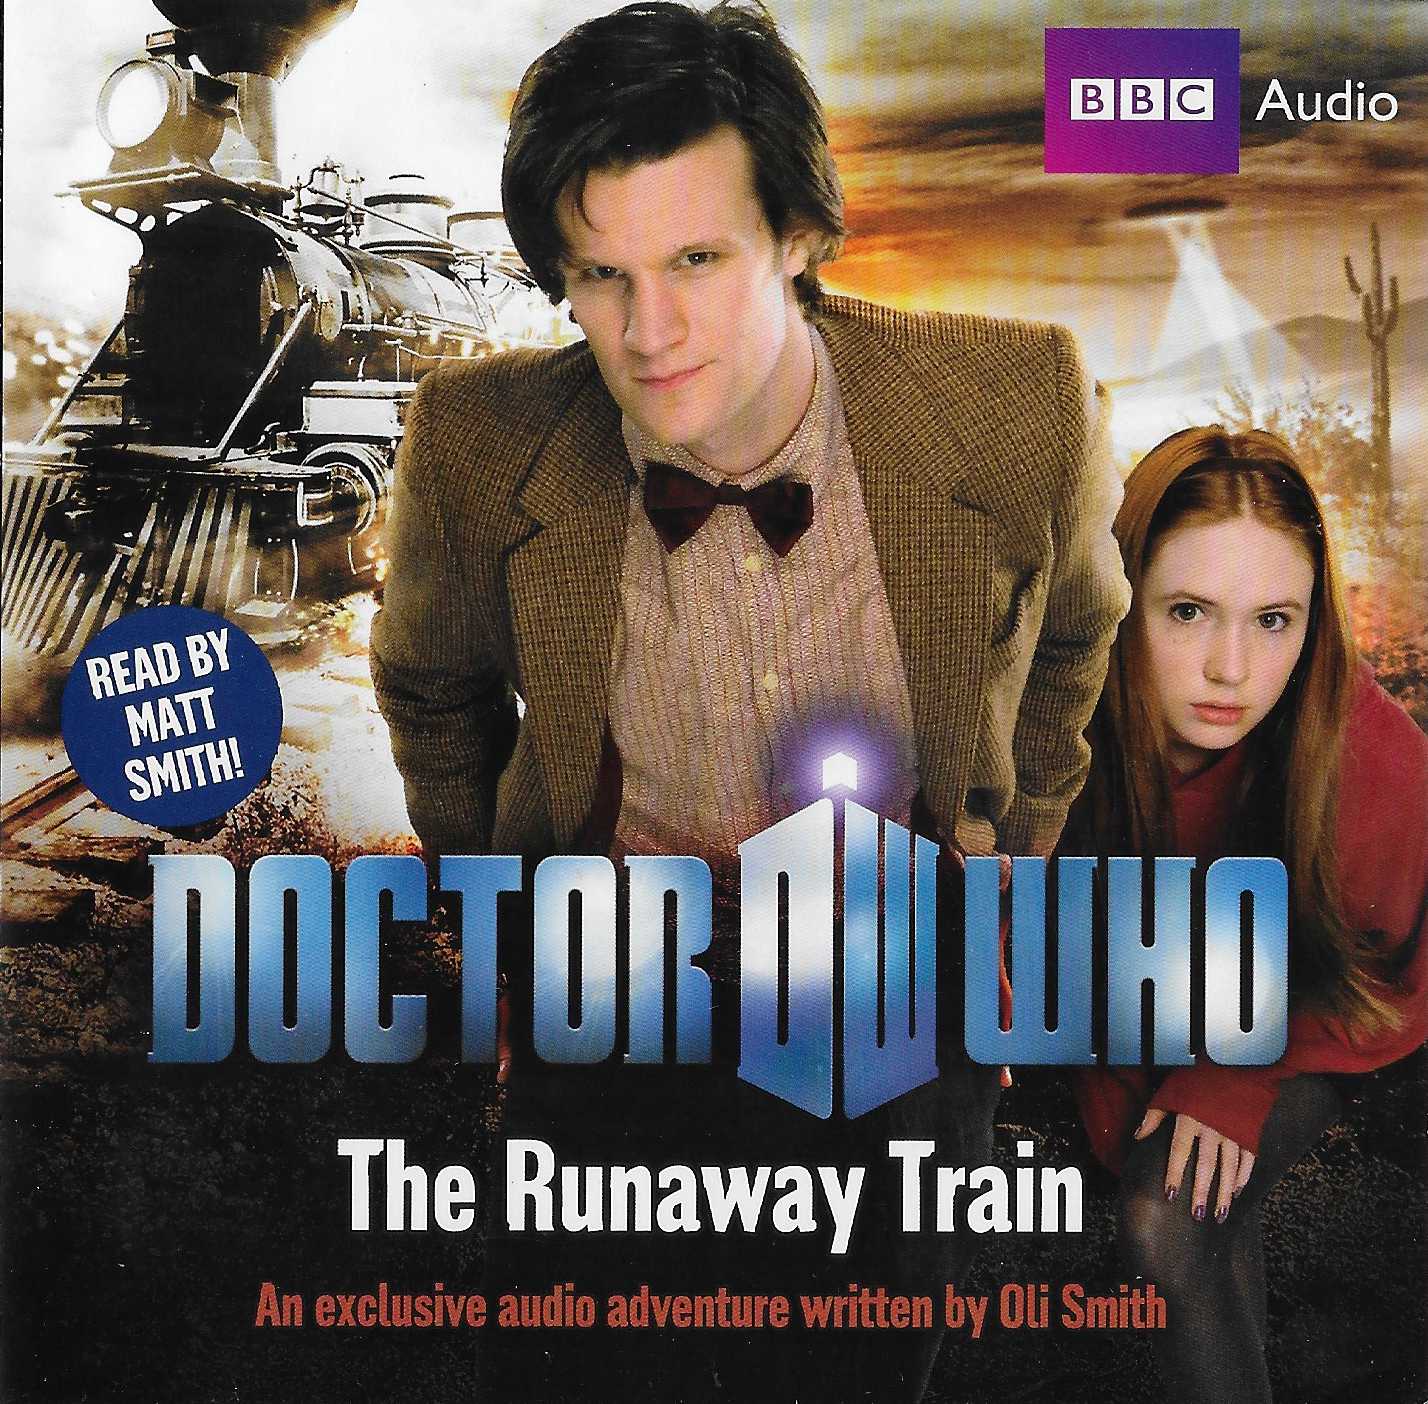 Picture of ISBN 978-1-408-42747-7 Doctor Who - The runaway train by artist Oli Smith from the BBC cds - Records and Tapes library